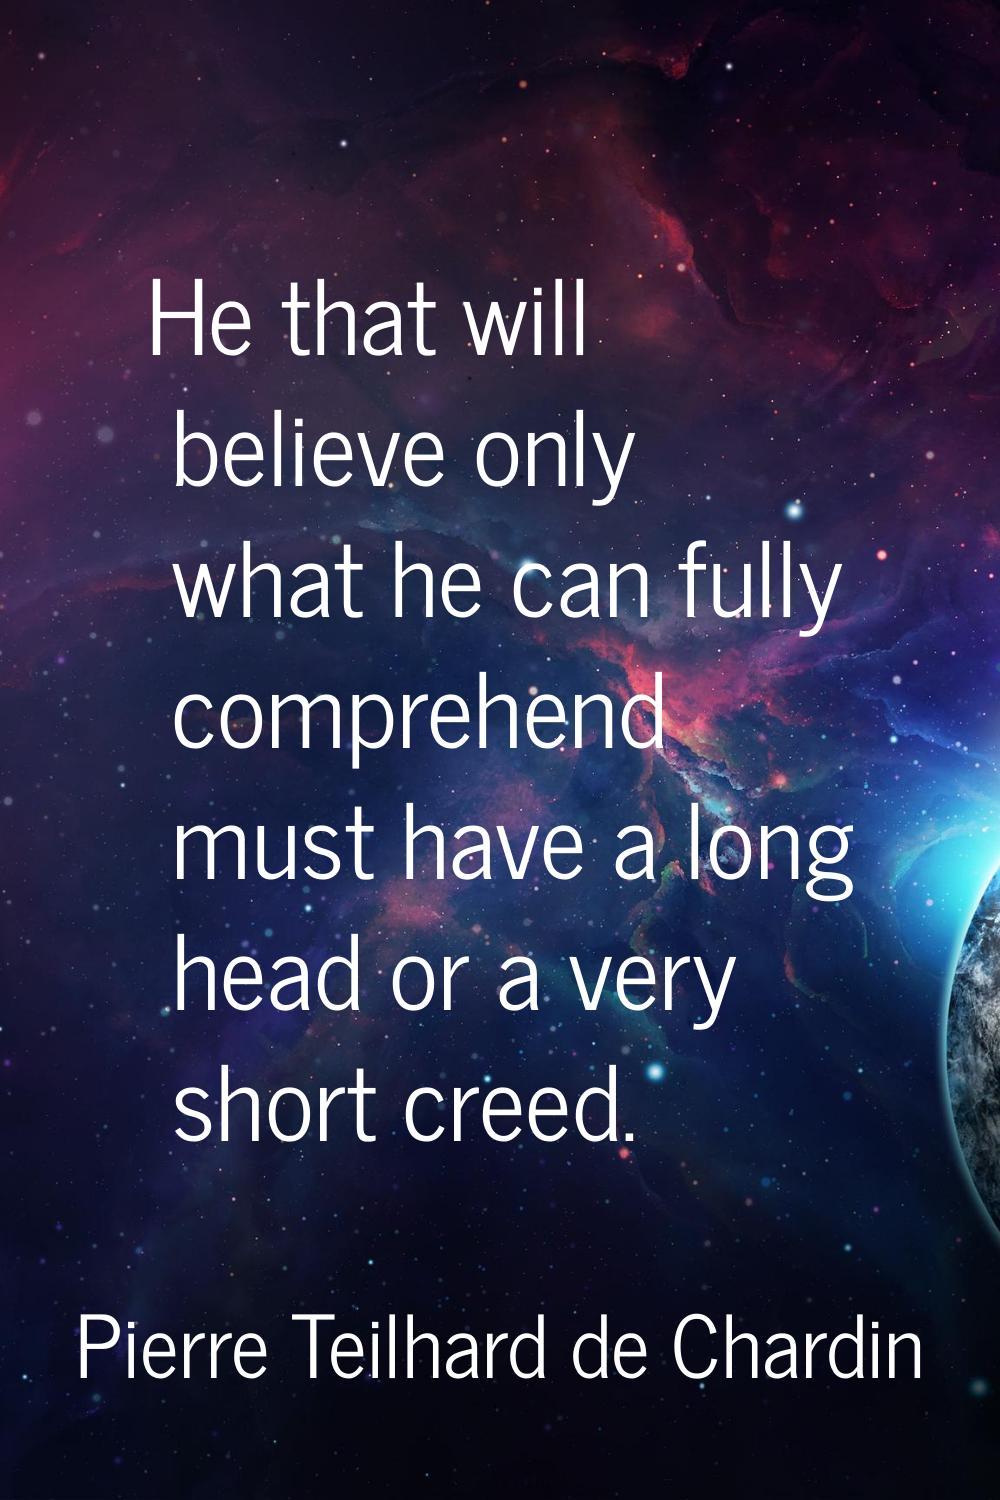 He that will believe only what he can fully comprehend must have a long head or a very short creed.